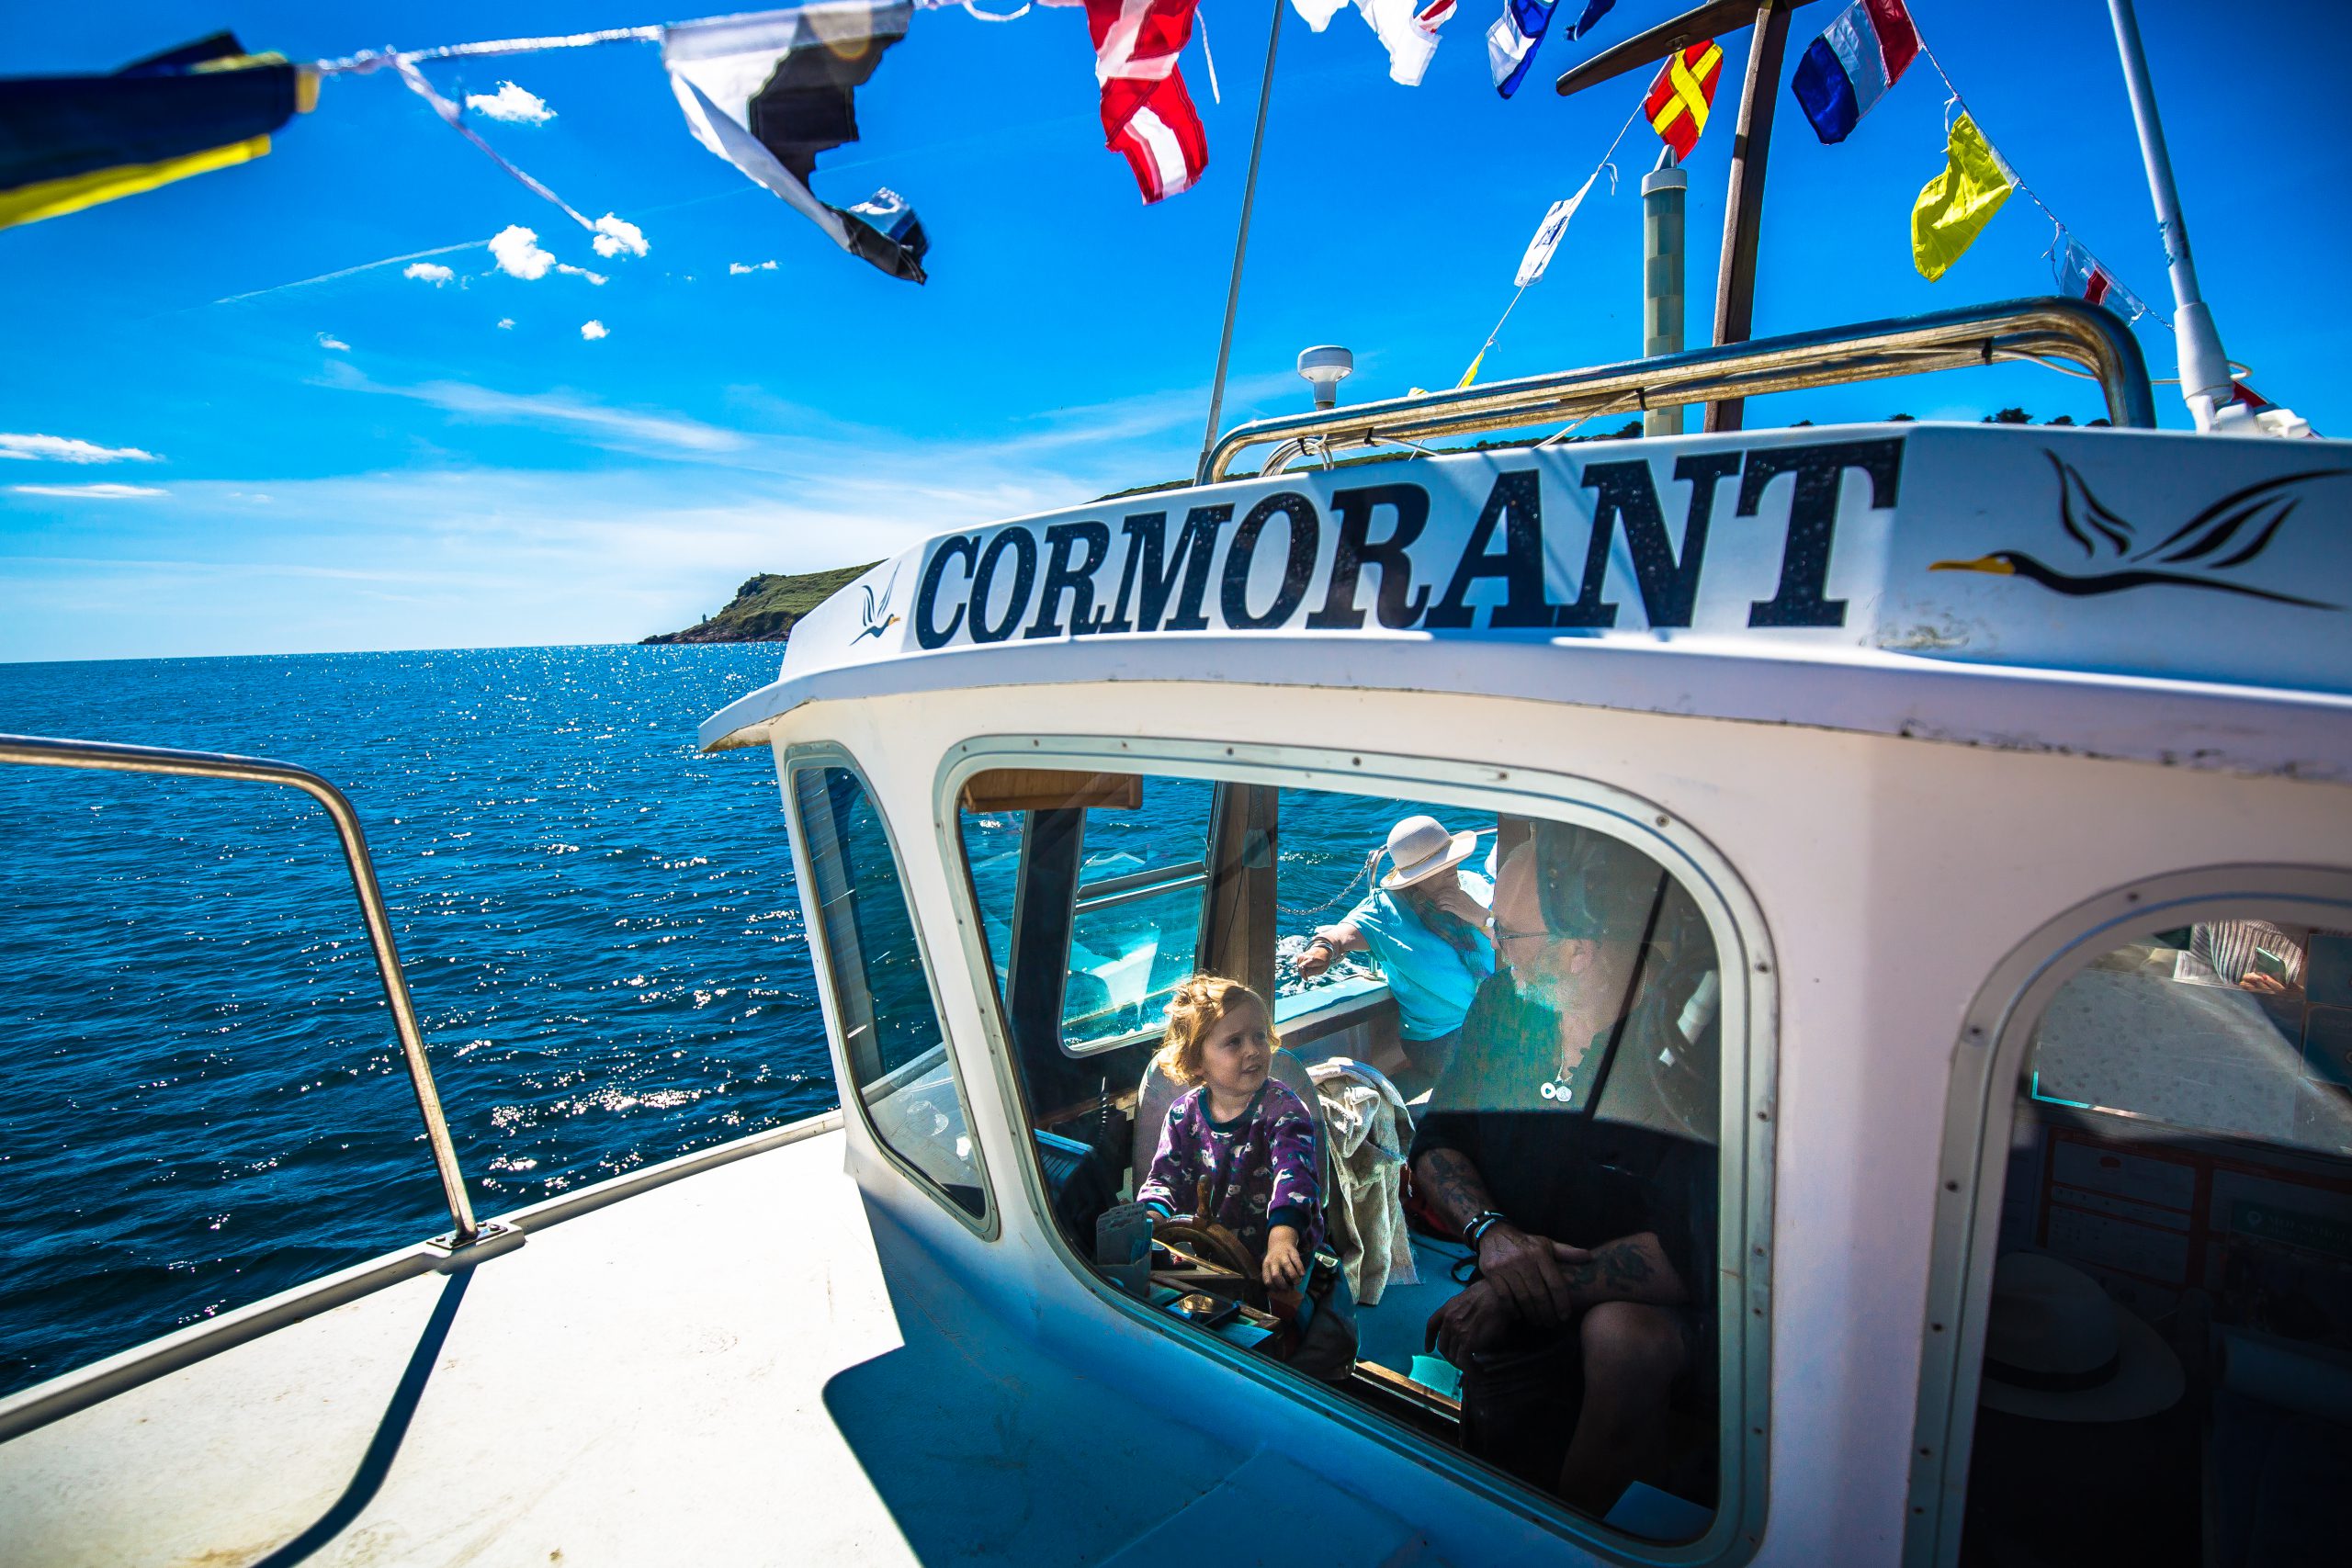 A young skipper takes the helm onboard The Cormorant.